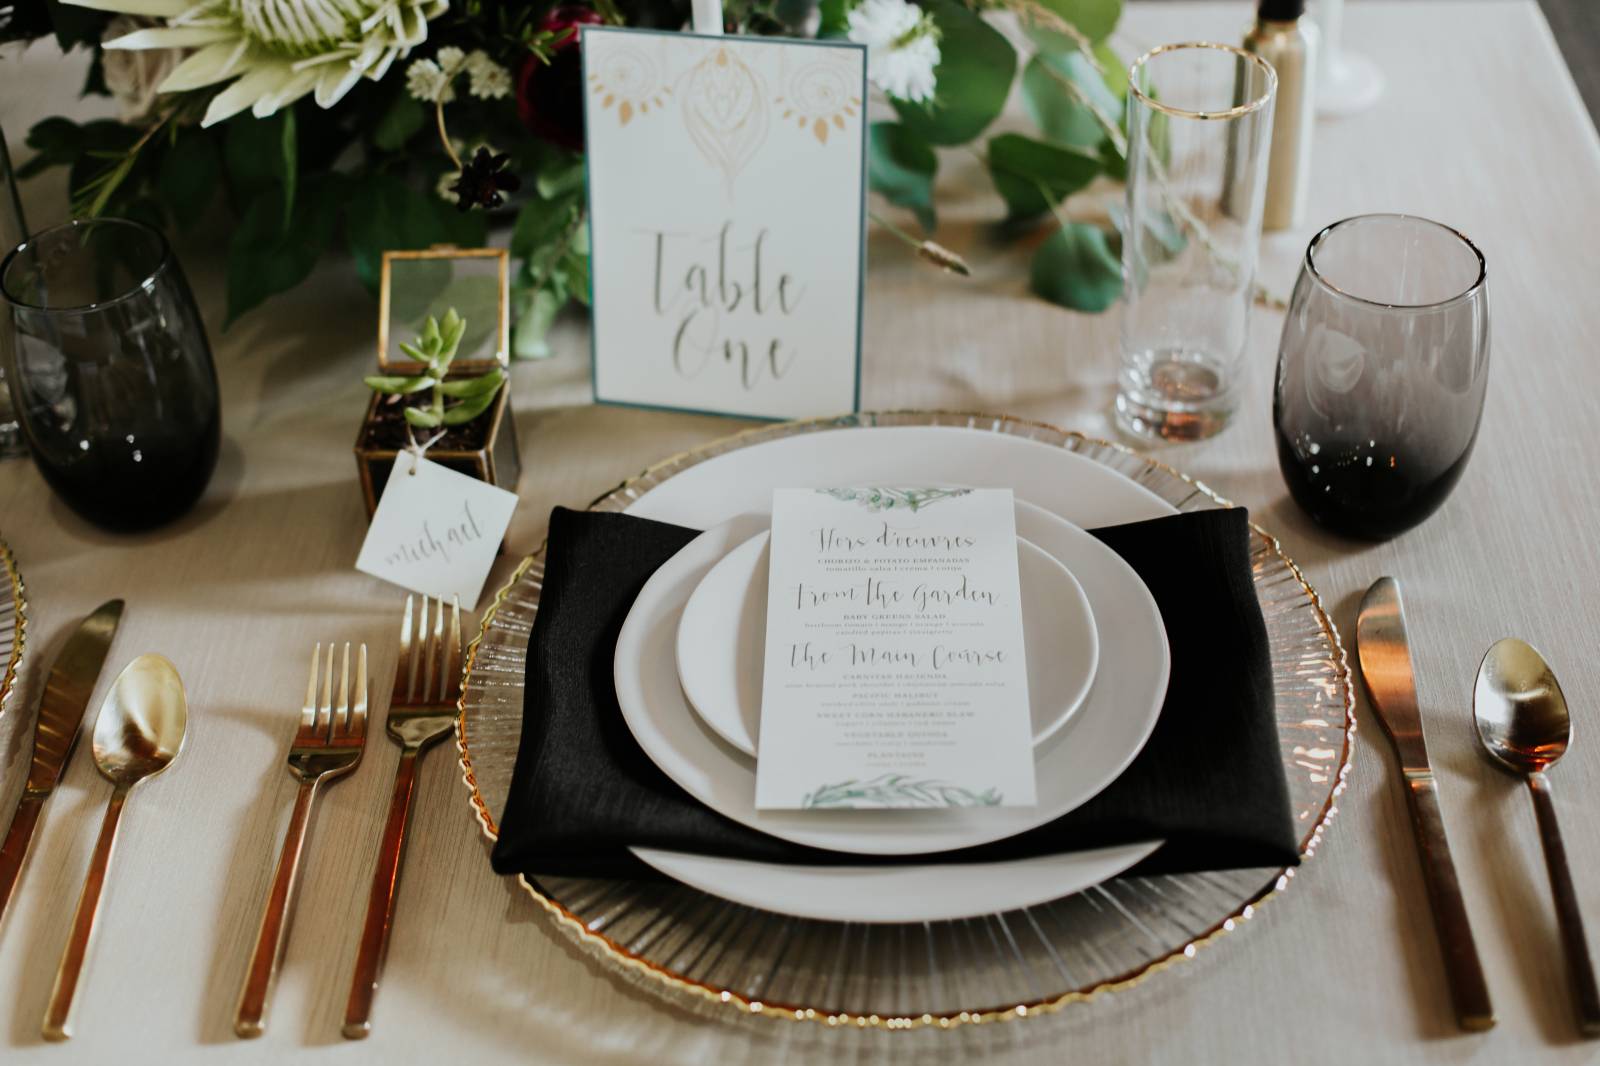 New Wedding Table Top Items from Liberty Party Rental |  Nashville Styled Shoot